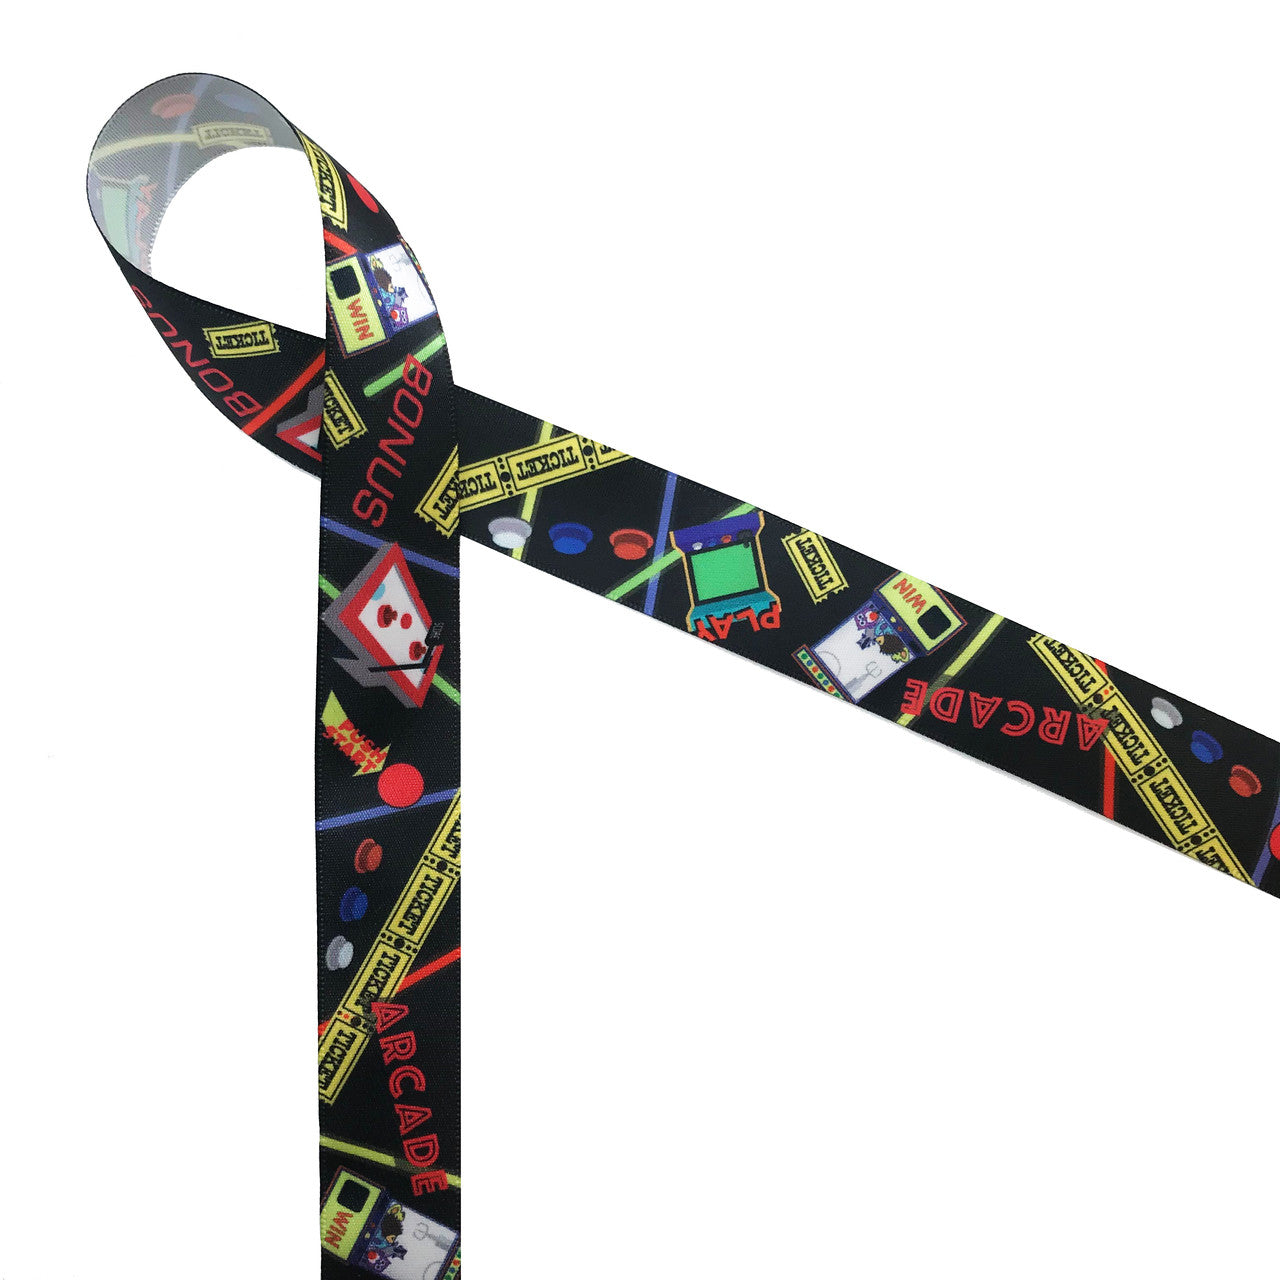 Arcade ribbon featuring all the fun elements of an afternoon of playing games, winning tickets and getting a prize in the claw machine! This is the ideal ribbon for gifts and favors at your next arcade themed party!